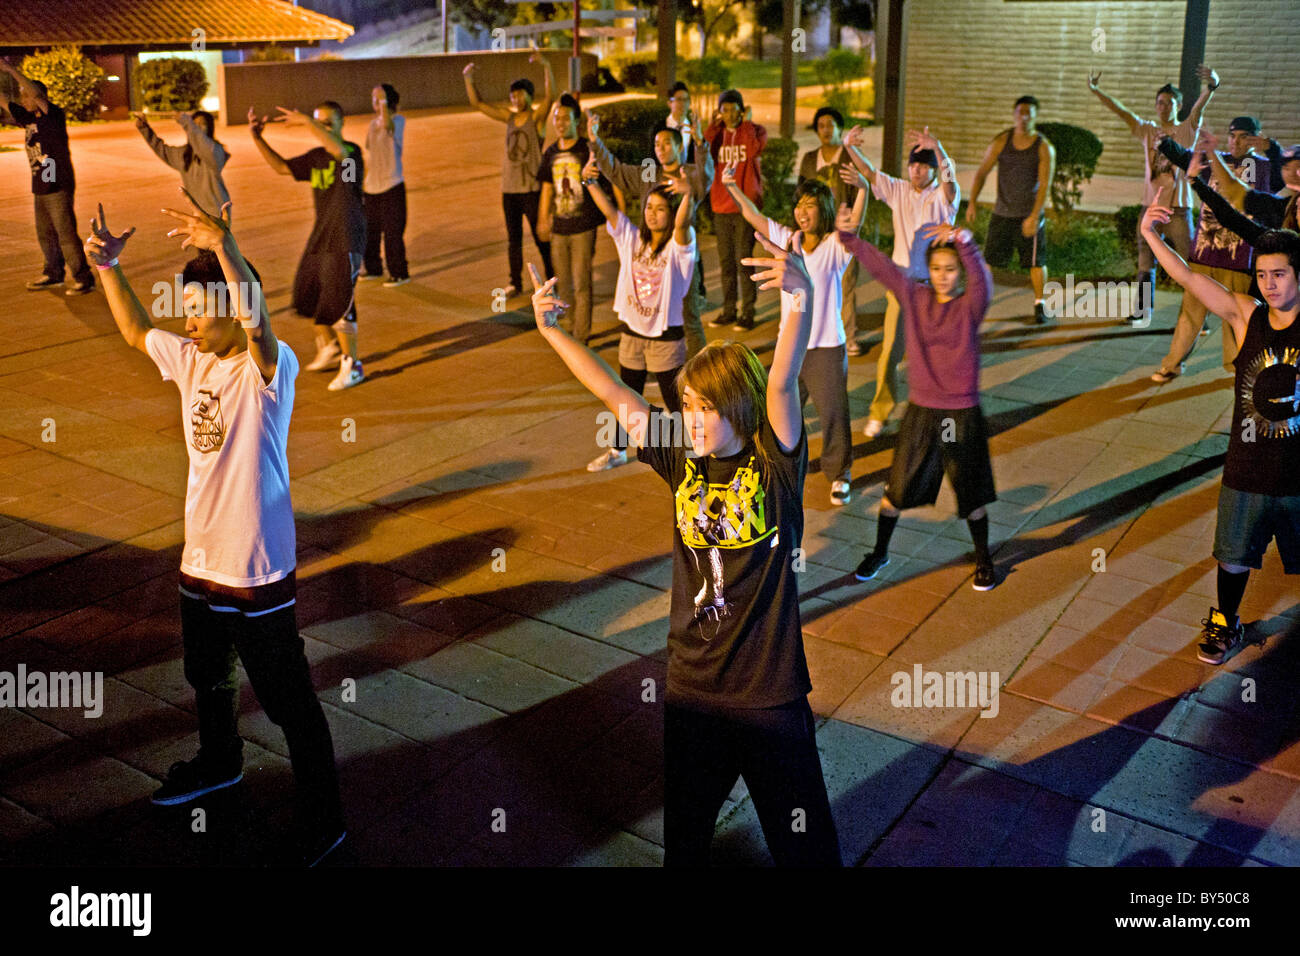 An Asian American college student conducts an informal night hip hop dancing class outdoors on campus in California. Stock Photo